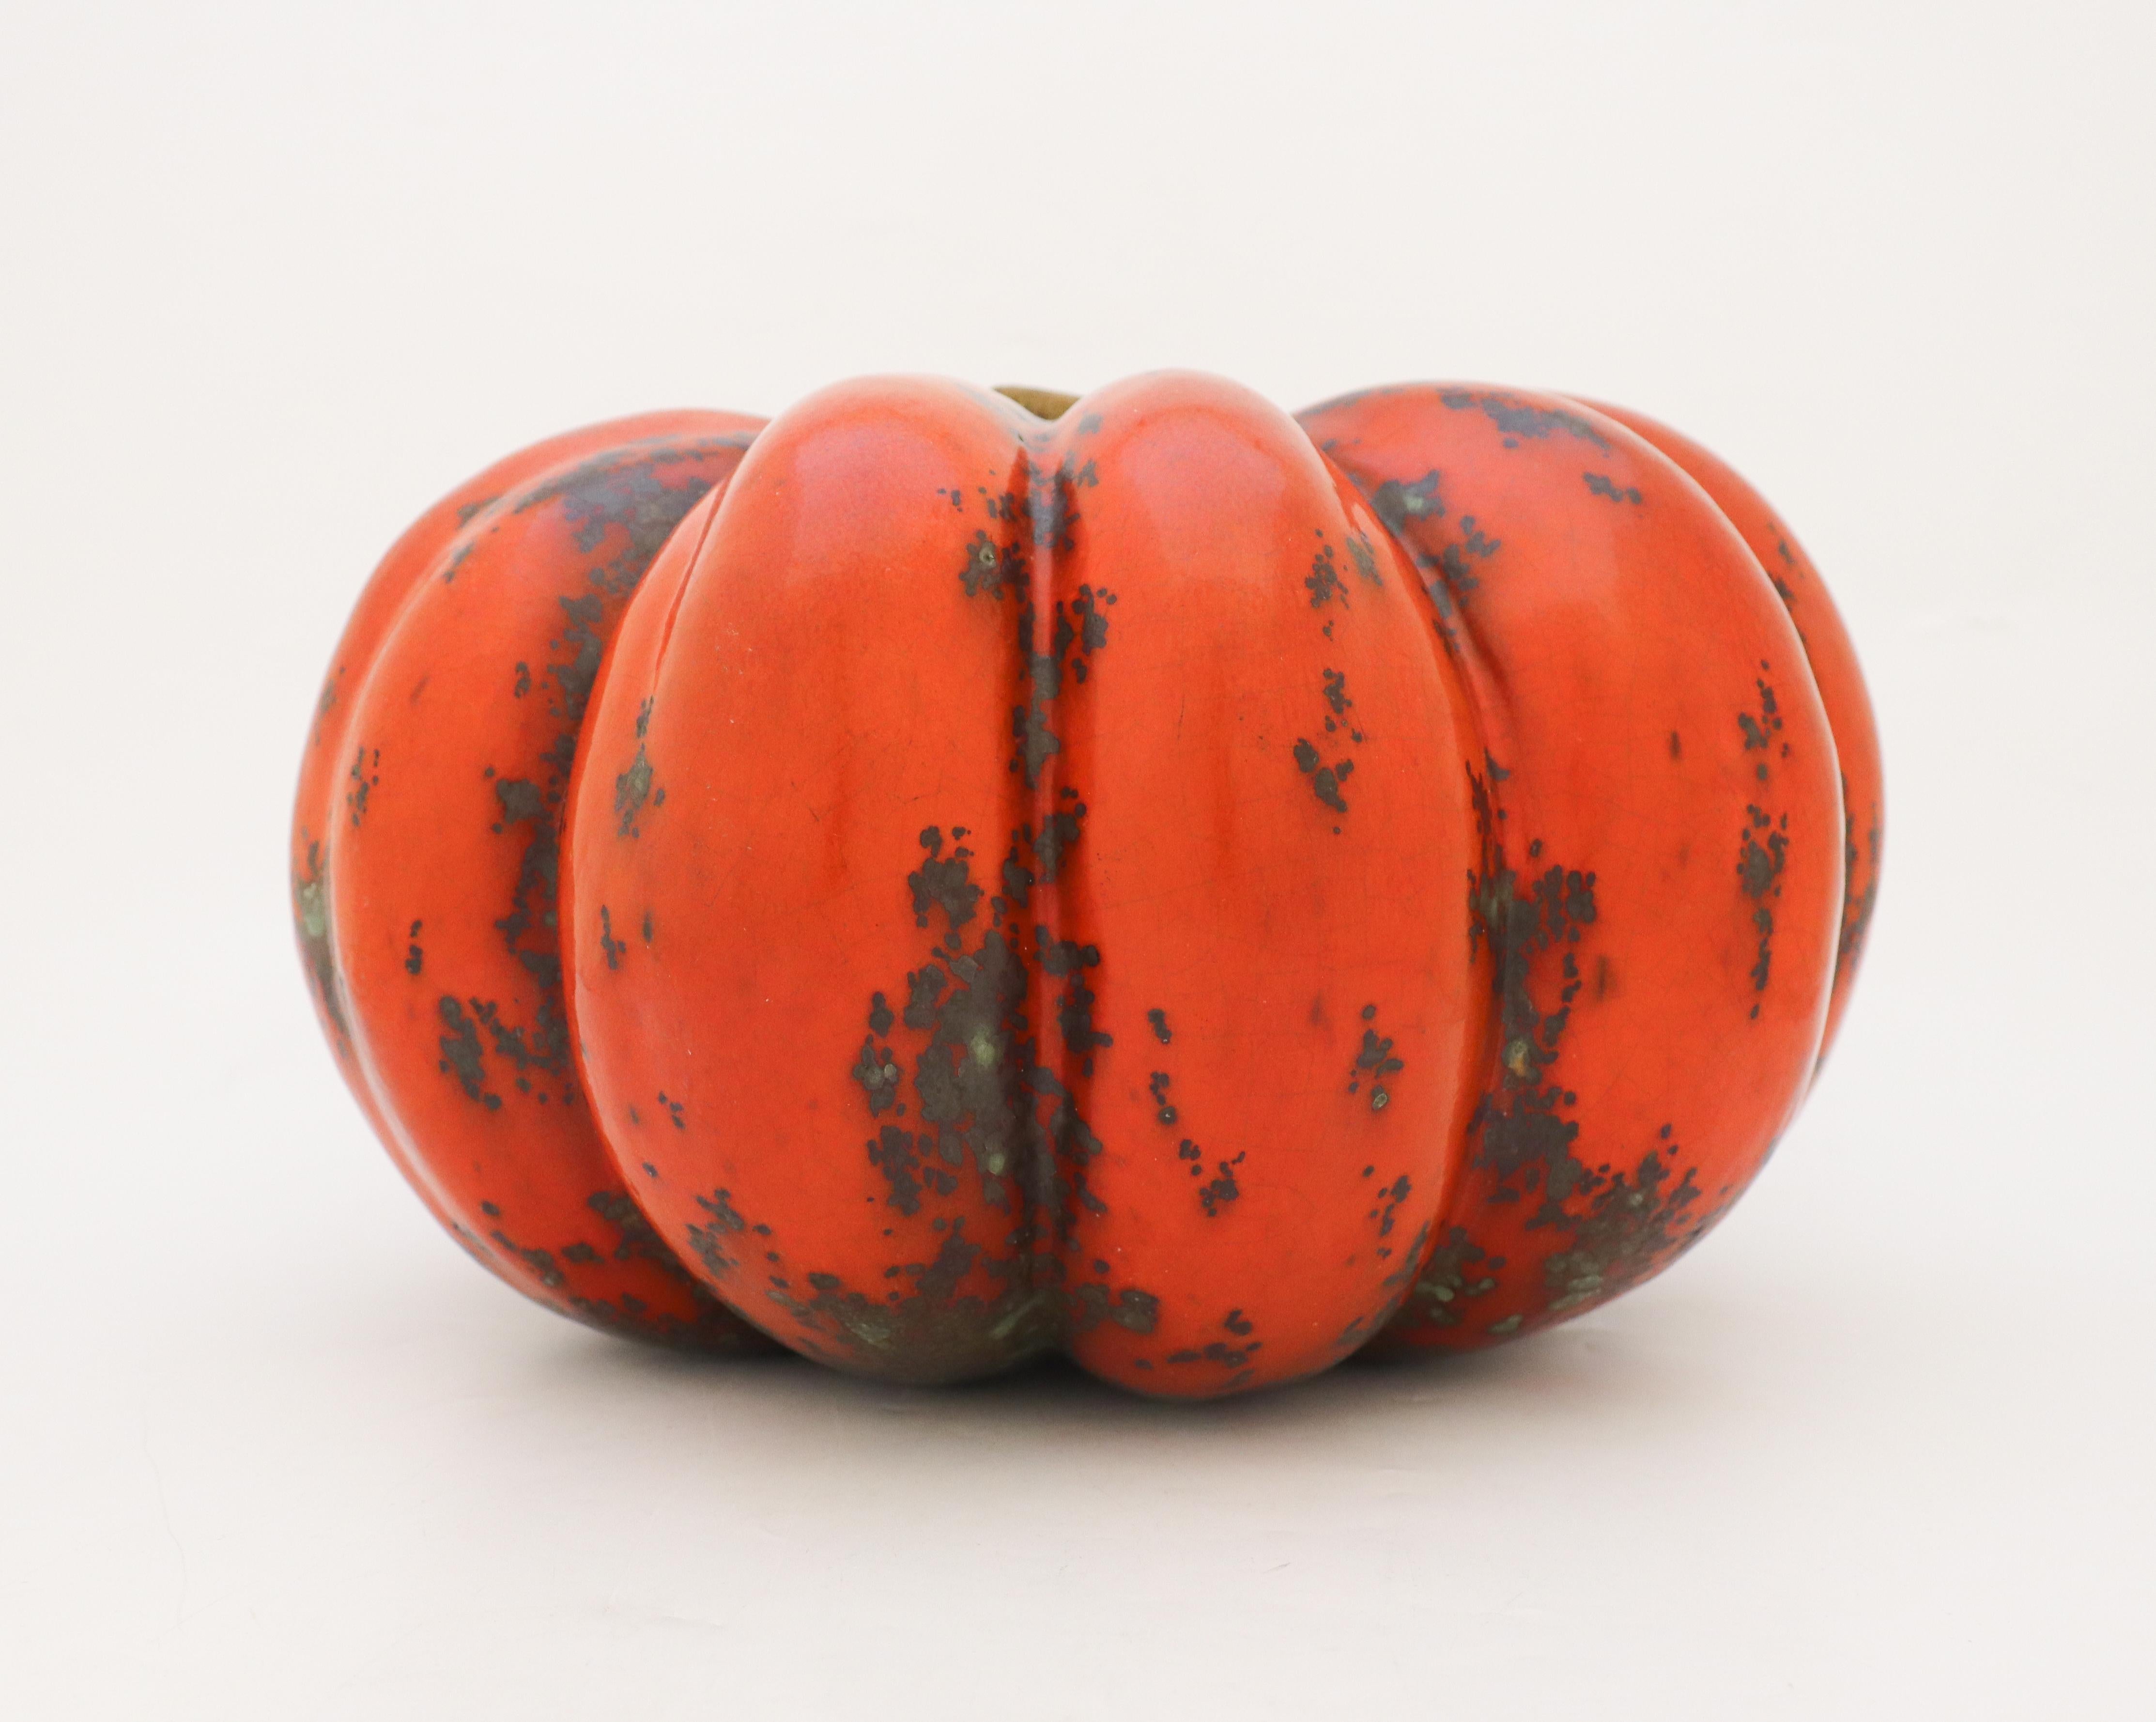 French Lovely Pumpkin, Ceramics by Hans Hedberg, Biot, France